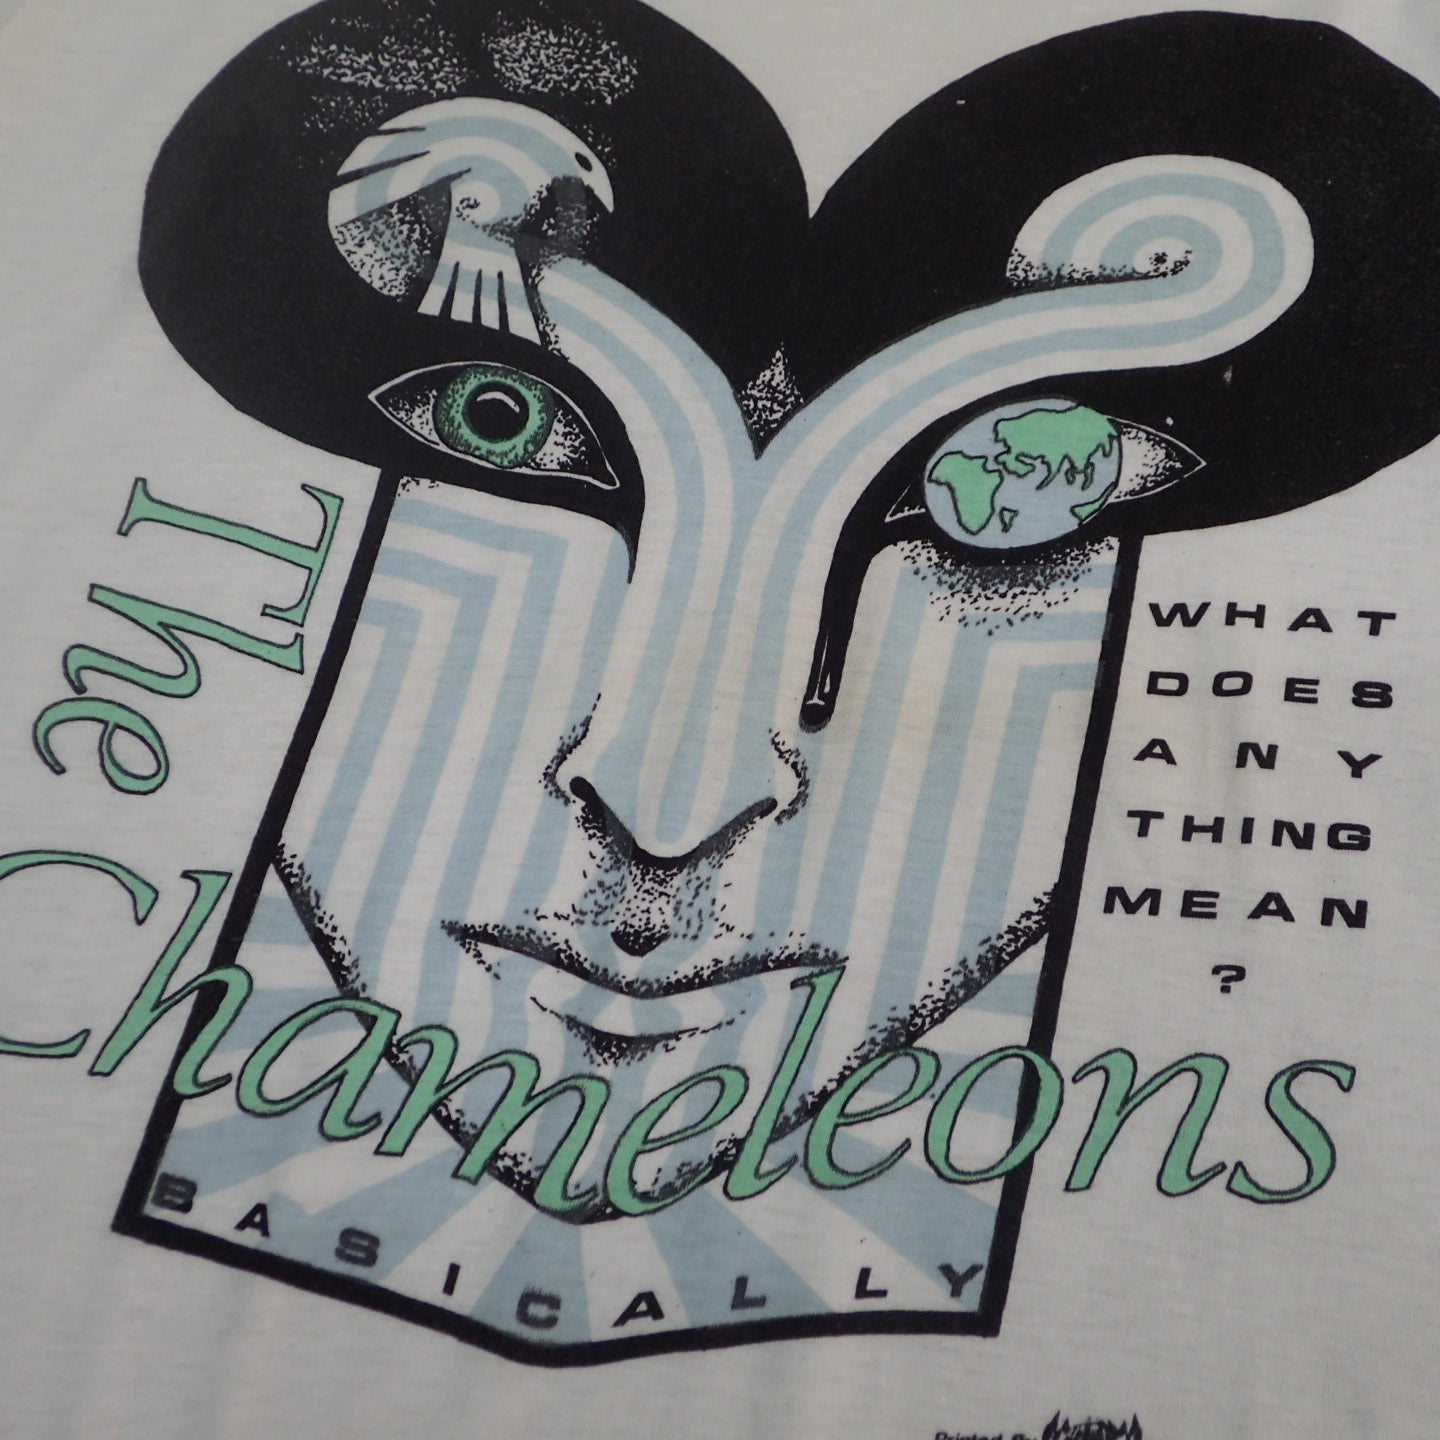 80s The Chameleons " What Does Anything Mean? Basically Tee"